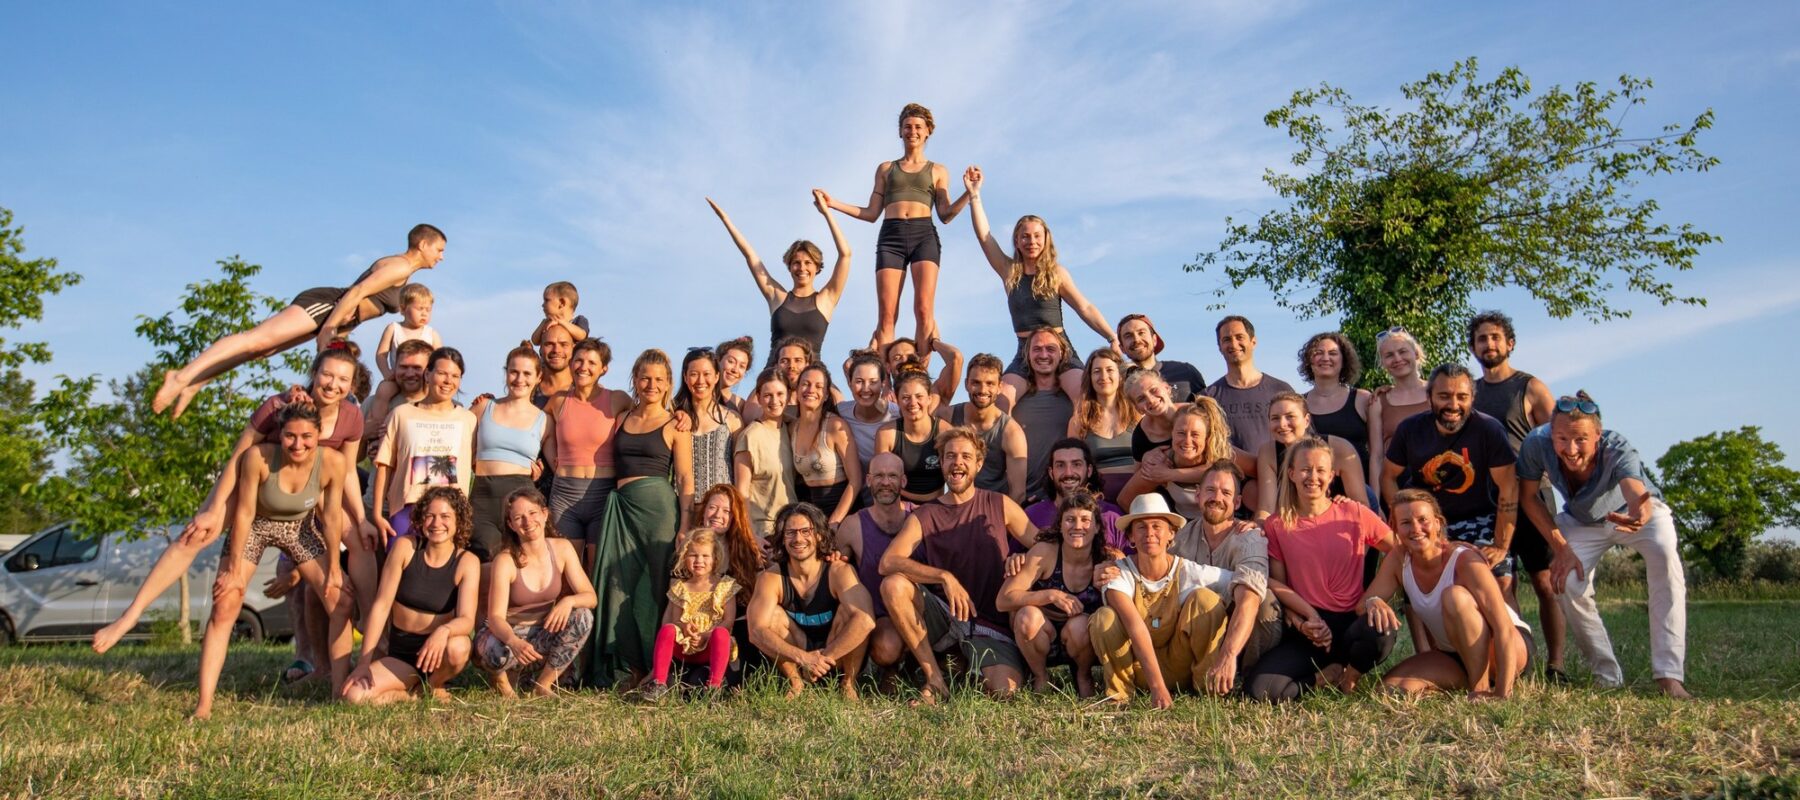 A big group of people standing next to each other smiling into the camera, celebrating life during our AcroYoga gathering.